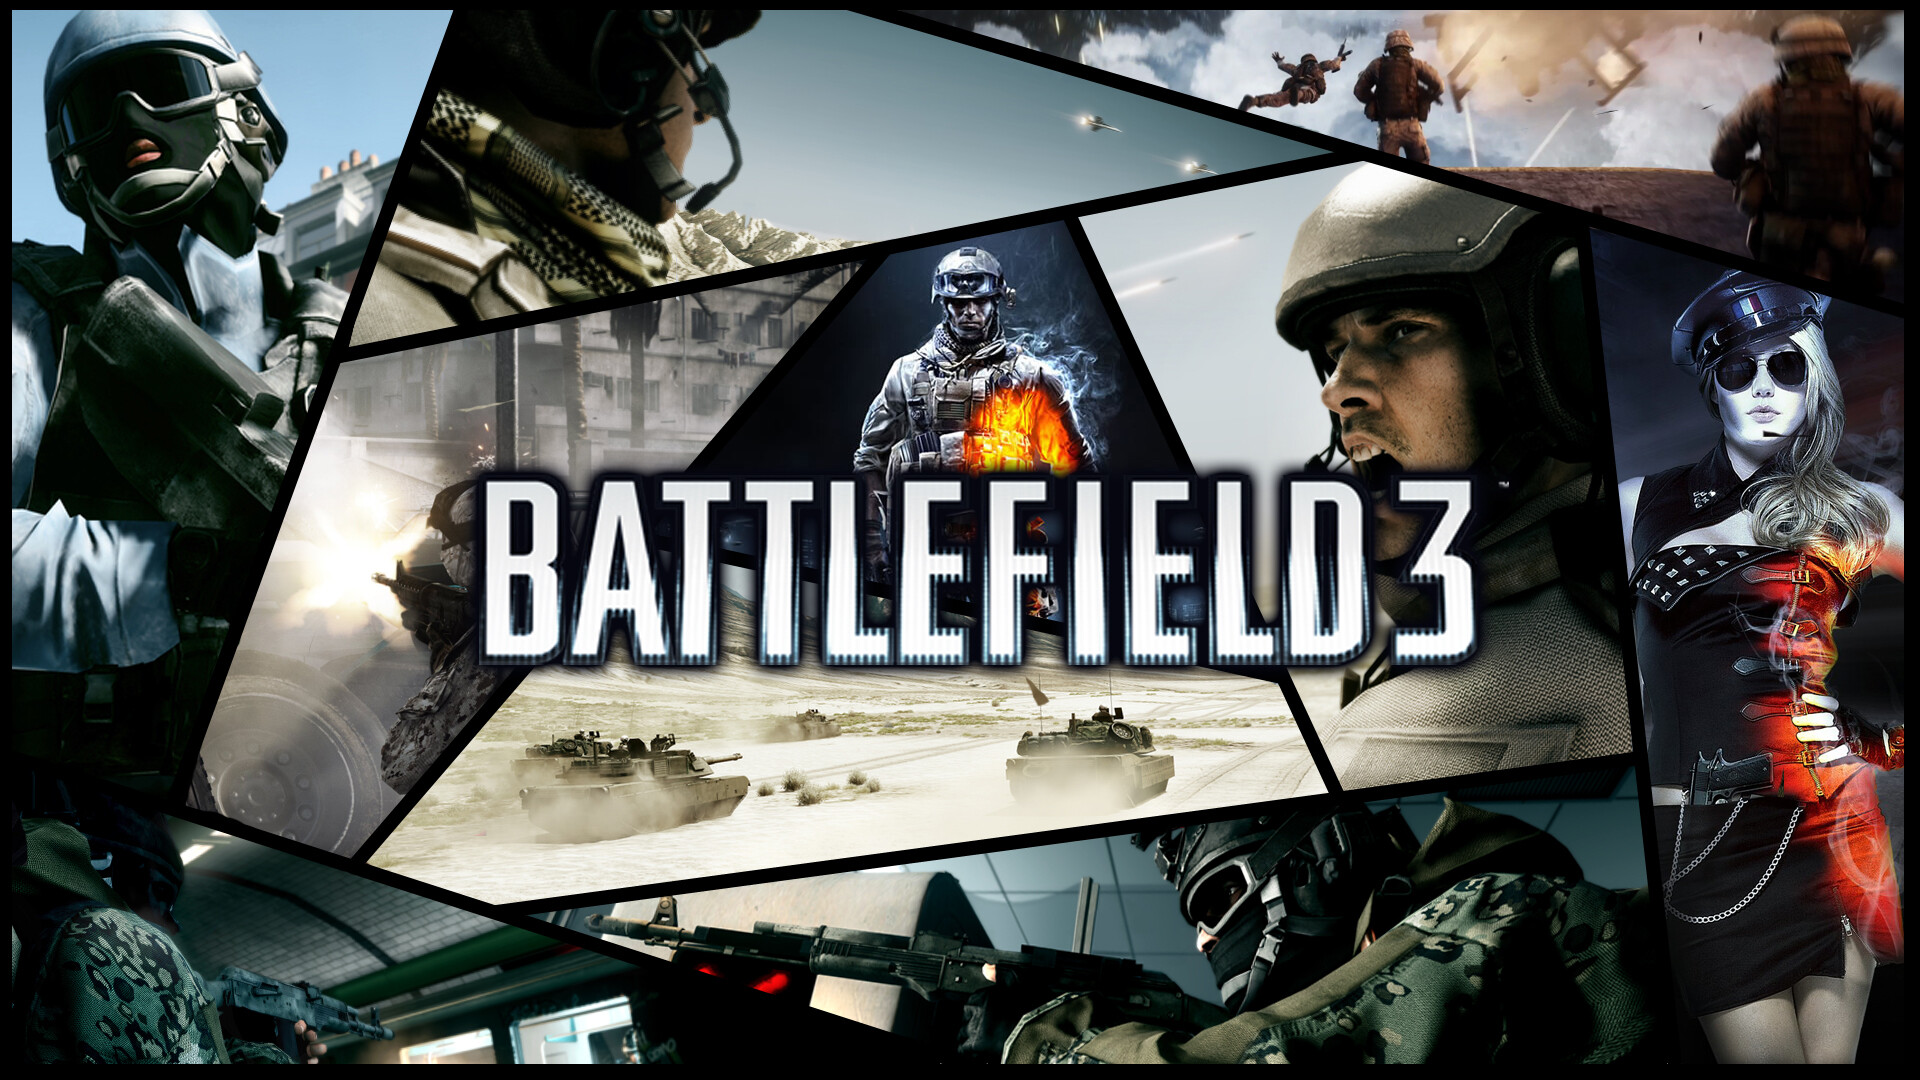 Battlefield 3: The next installment of DICE's cutting-edge game engine, Frostbite 2. 1920x1080 Full HD Background.